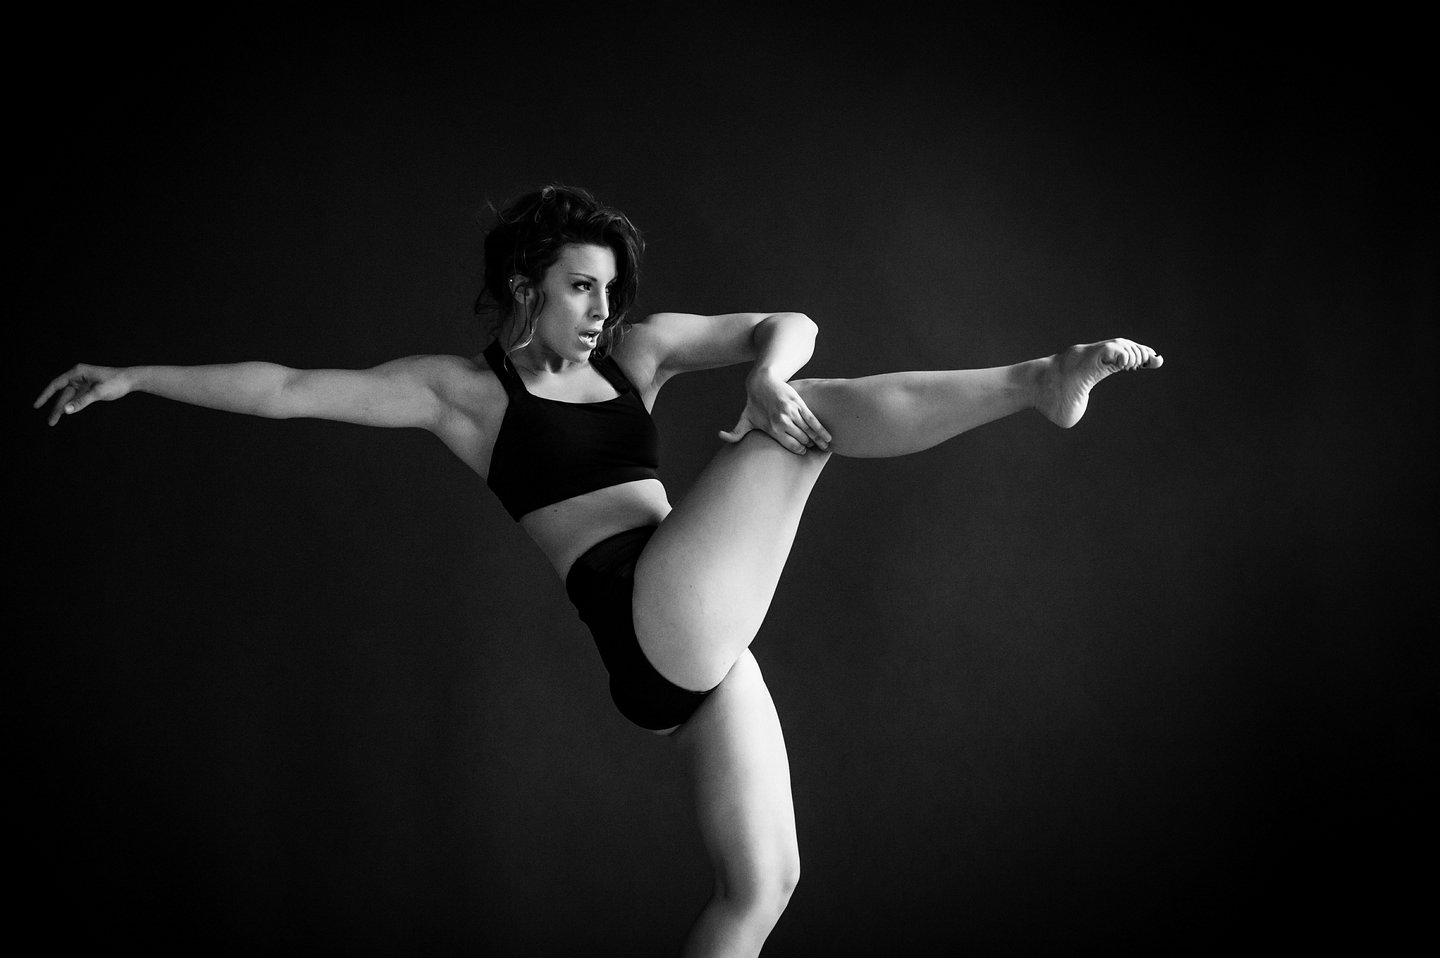 Los Angeles Dance Portrait Photo - Stephanie Abrams - by Tommy Xing Photography 05.jpg